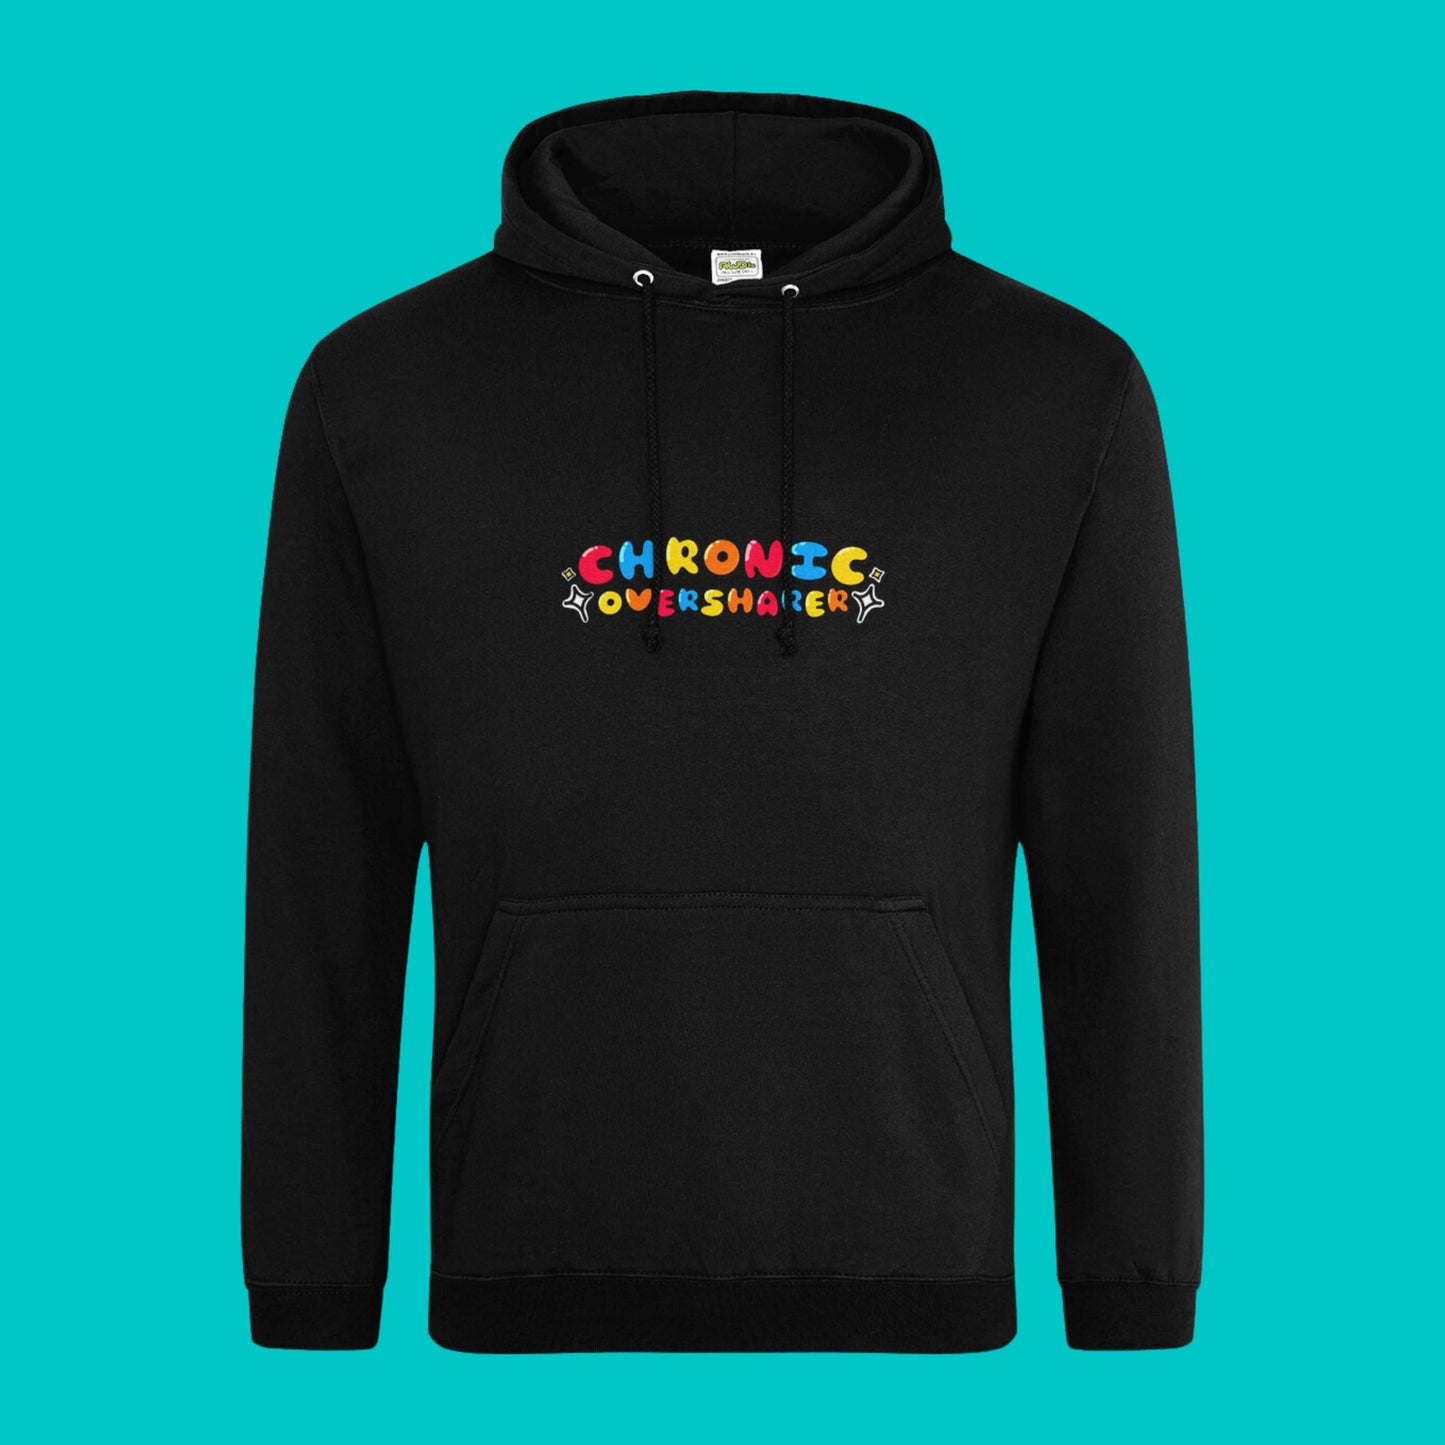 The Chronic Over Sharer Black Hoodie shown on a blue background. The black hoodie features a drawstring hood, a large front pocket and the text 'chronic oversharer' in rainbow bubble font with a black shadow effect and white sparkles. The design was created to raise awareness for neurodivergent disorders such as ADHD.